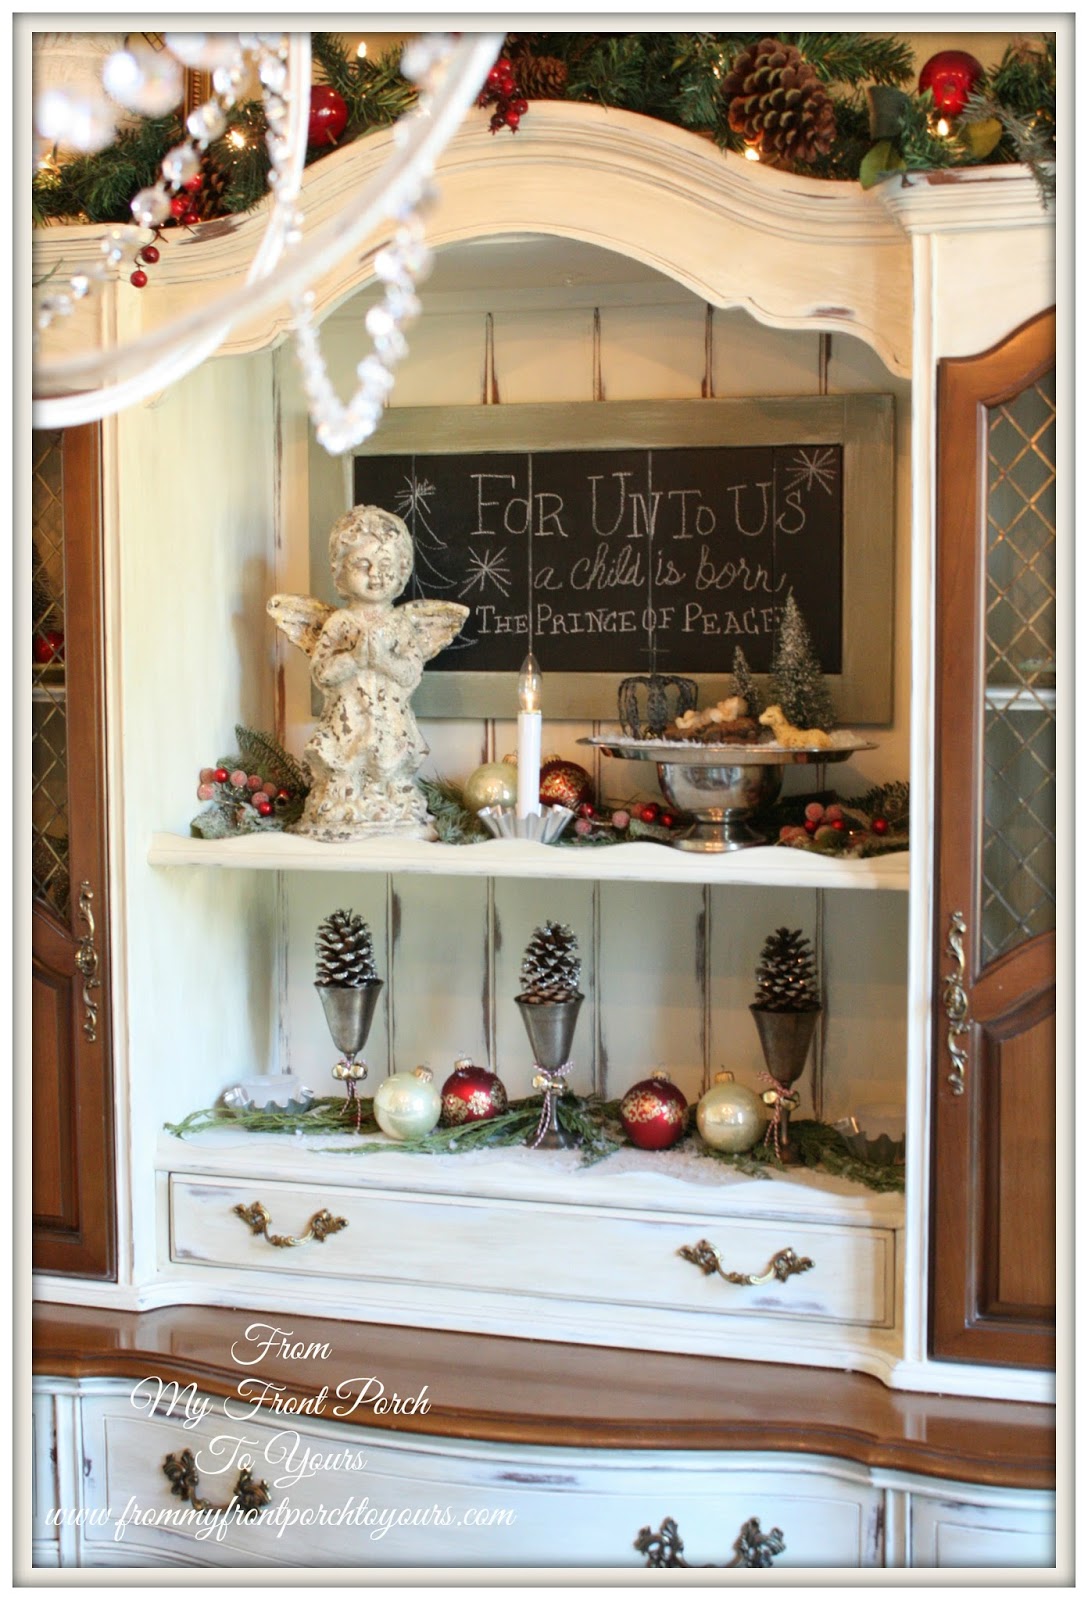 From My Front Porch To Yours: French Farmhouse Christmas Dining Room 2013